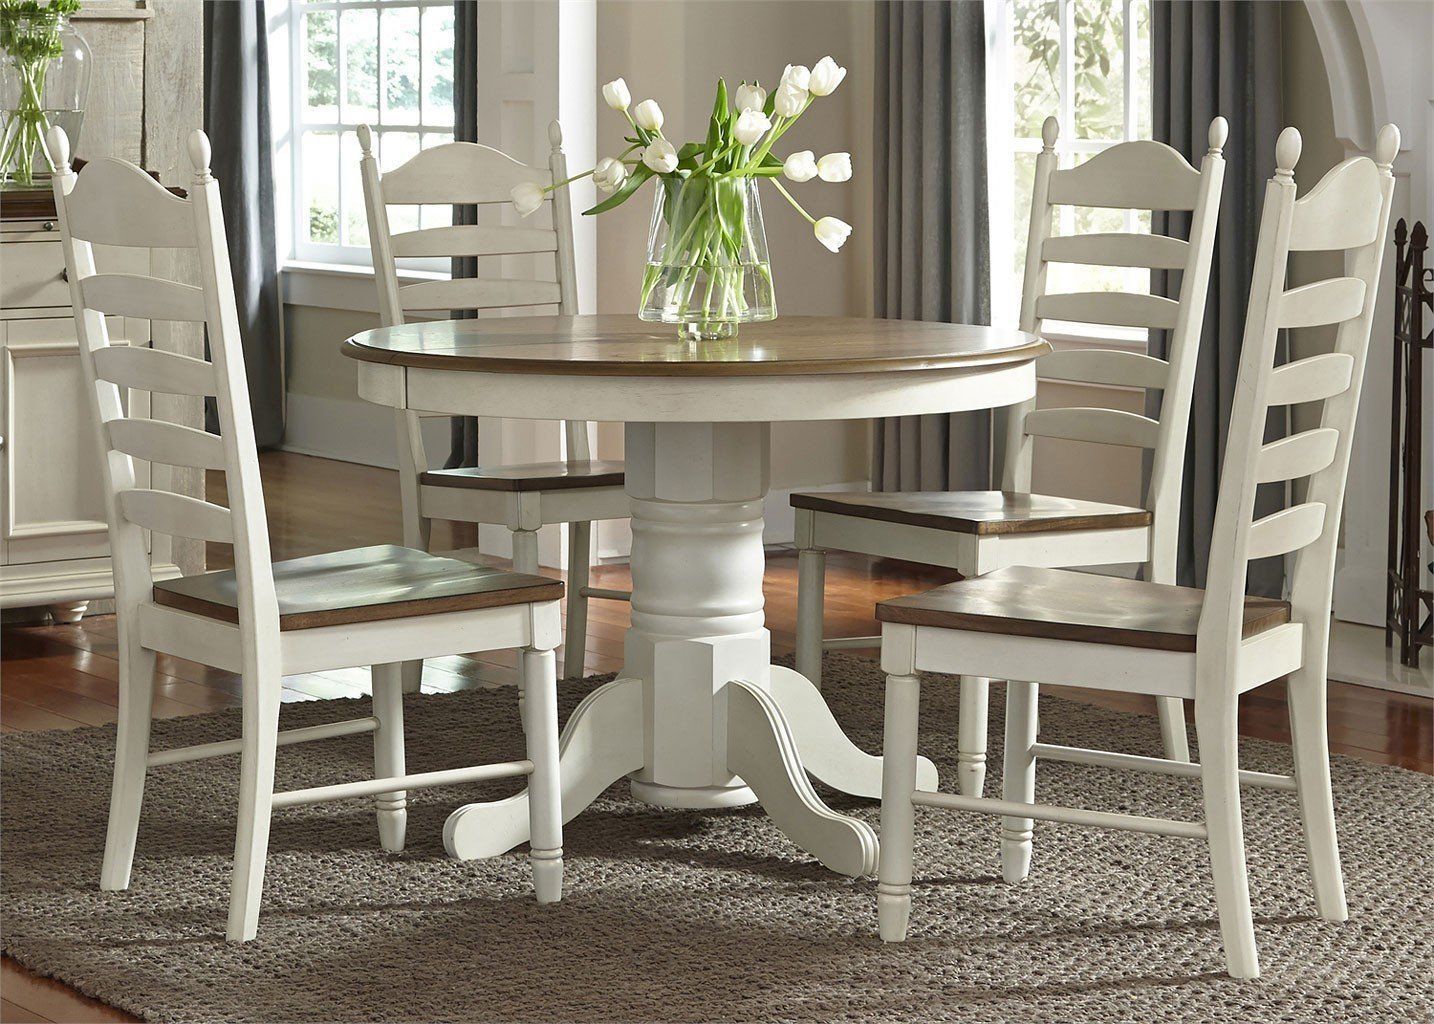 Springfield Round Dining Room Set Liberty Furniture Throughout Best And Newest Larkin  (View 13 of 15)